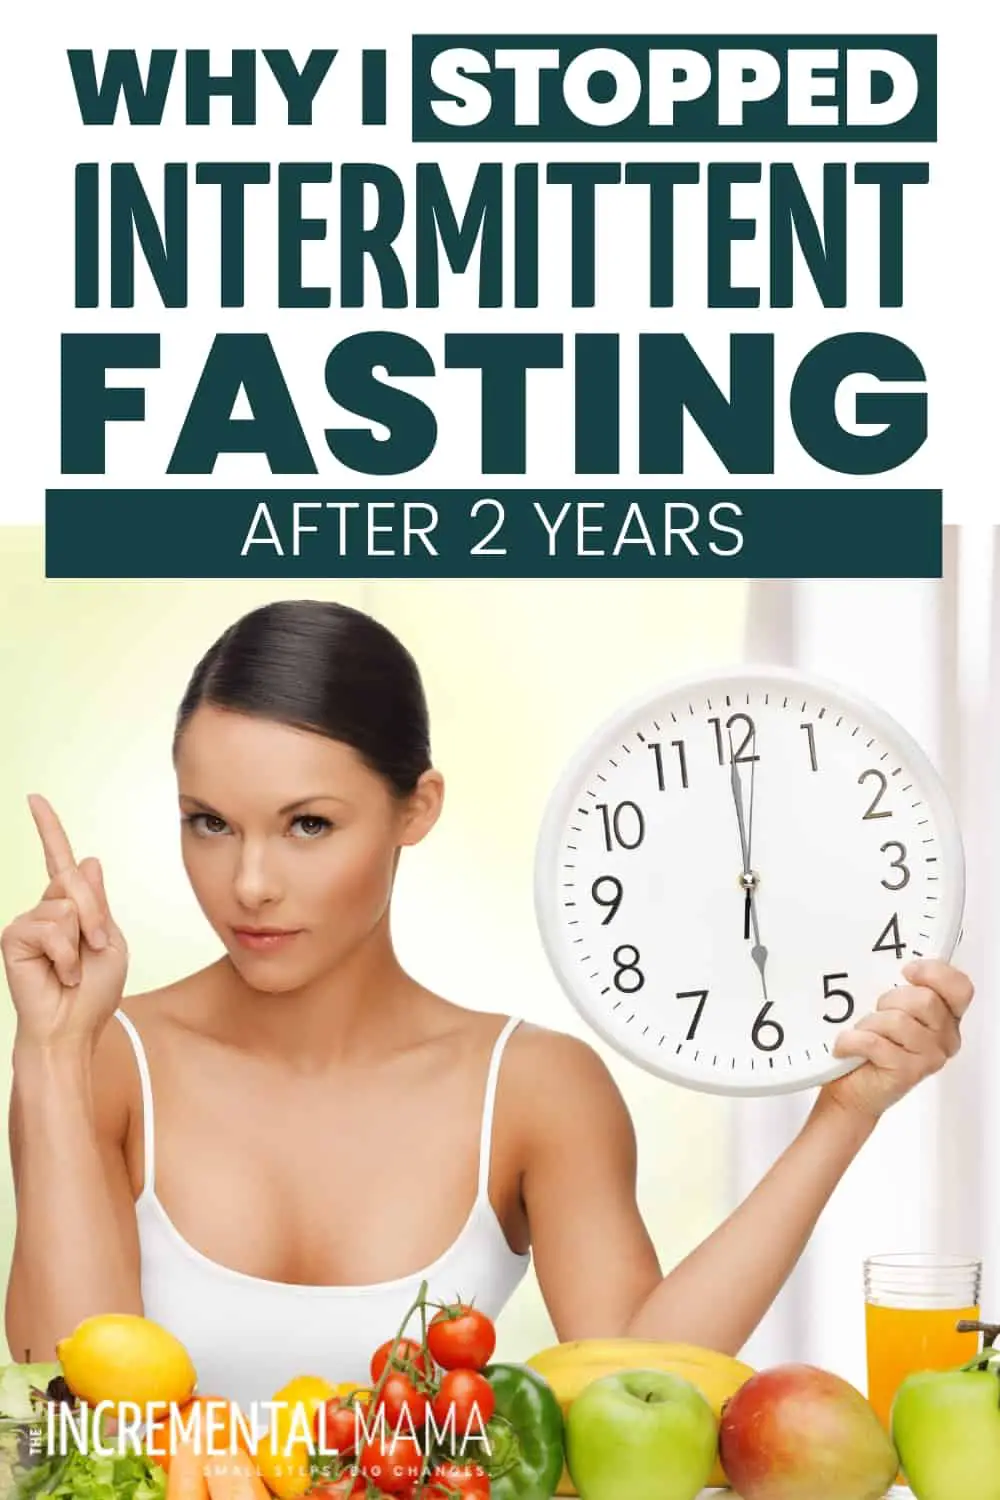 Why I Stopped Intermittent Fasting After 2 Years